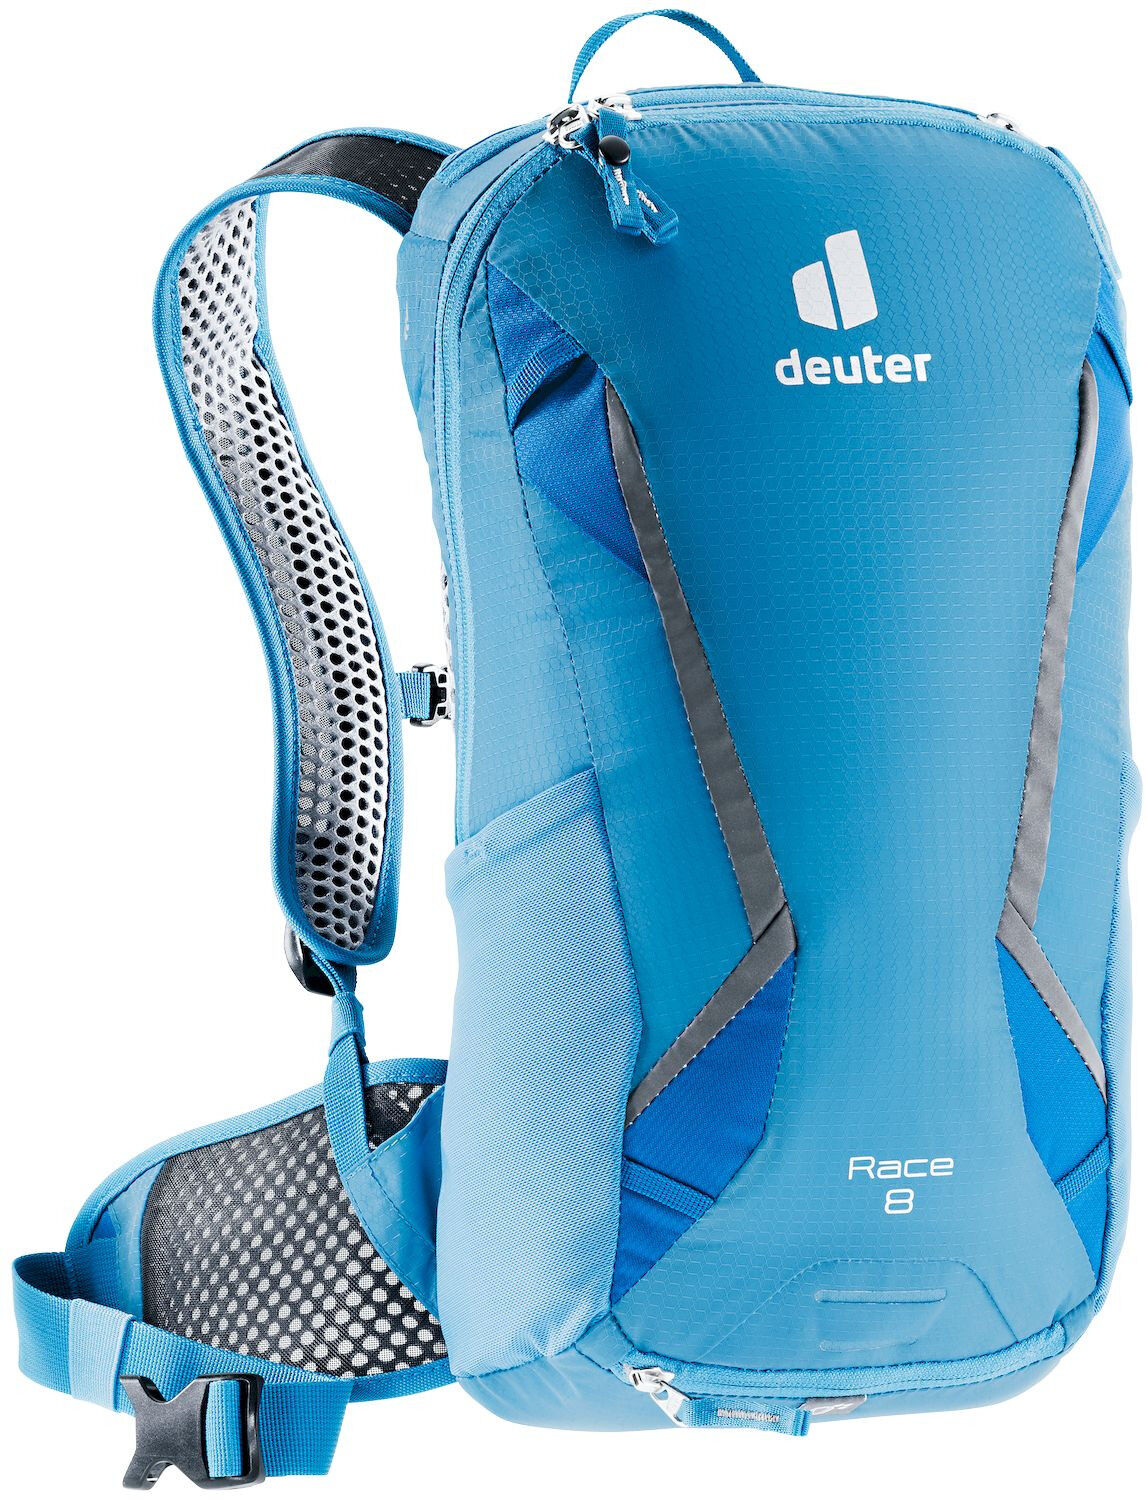 Deuter Race - Cycling backpack